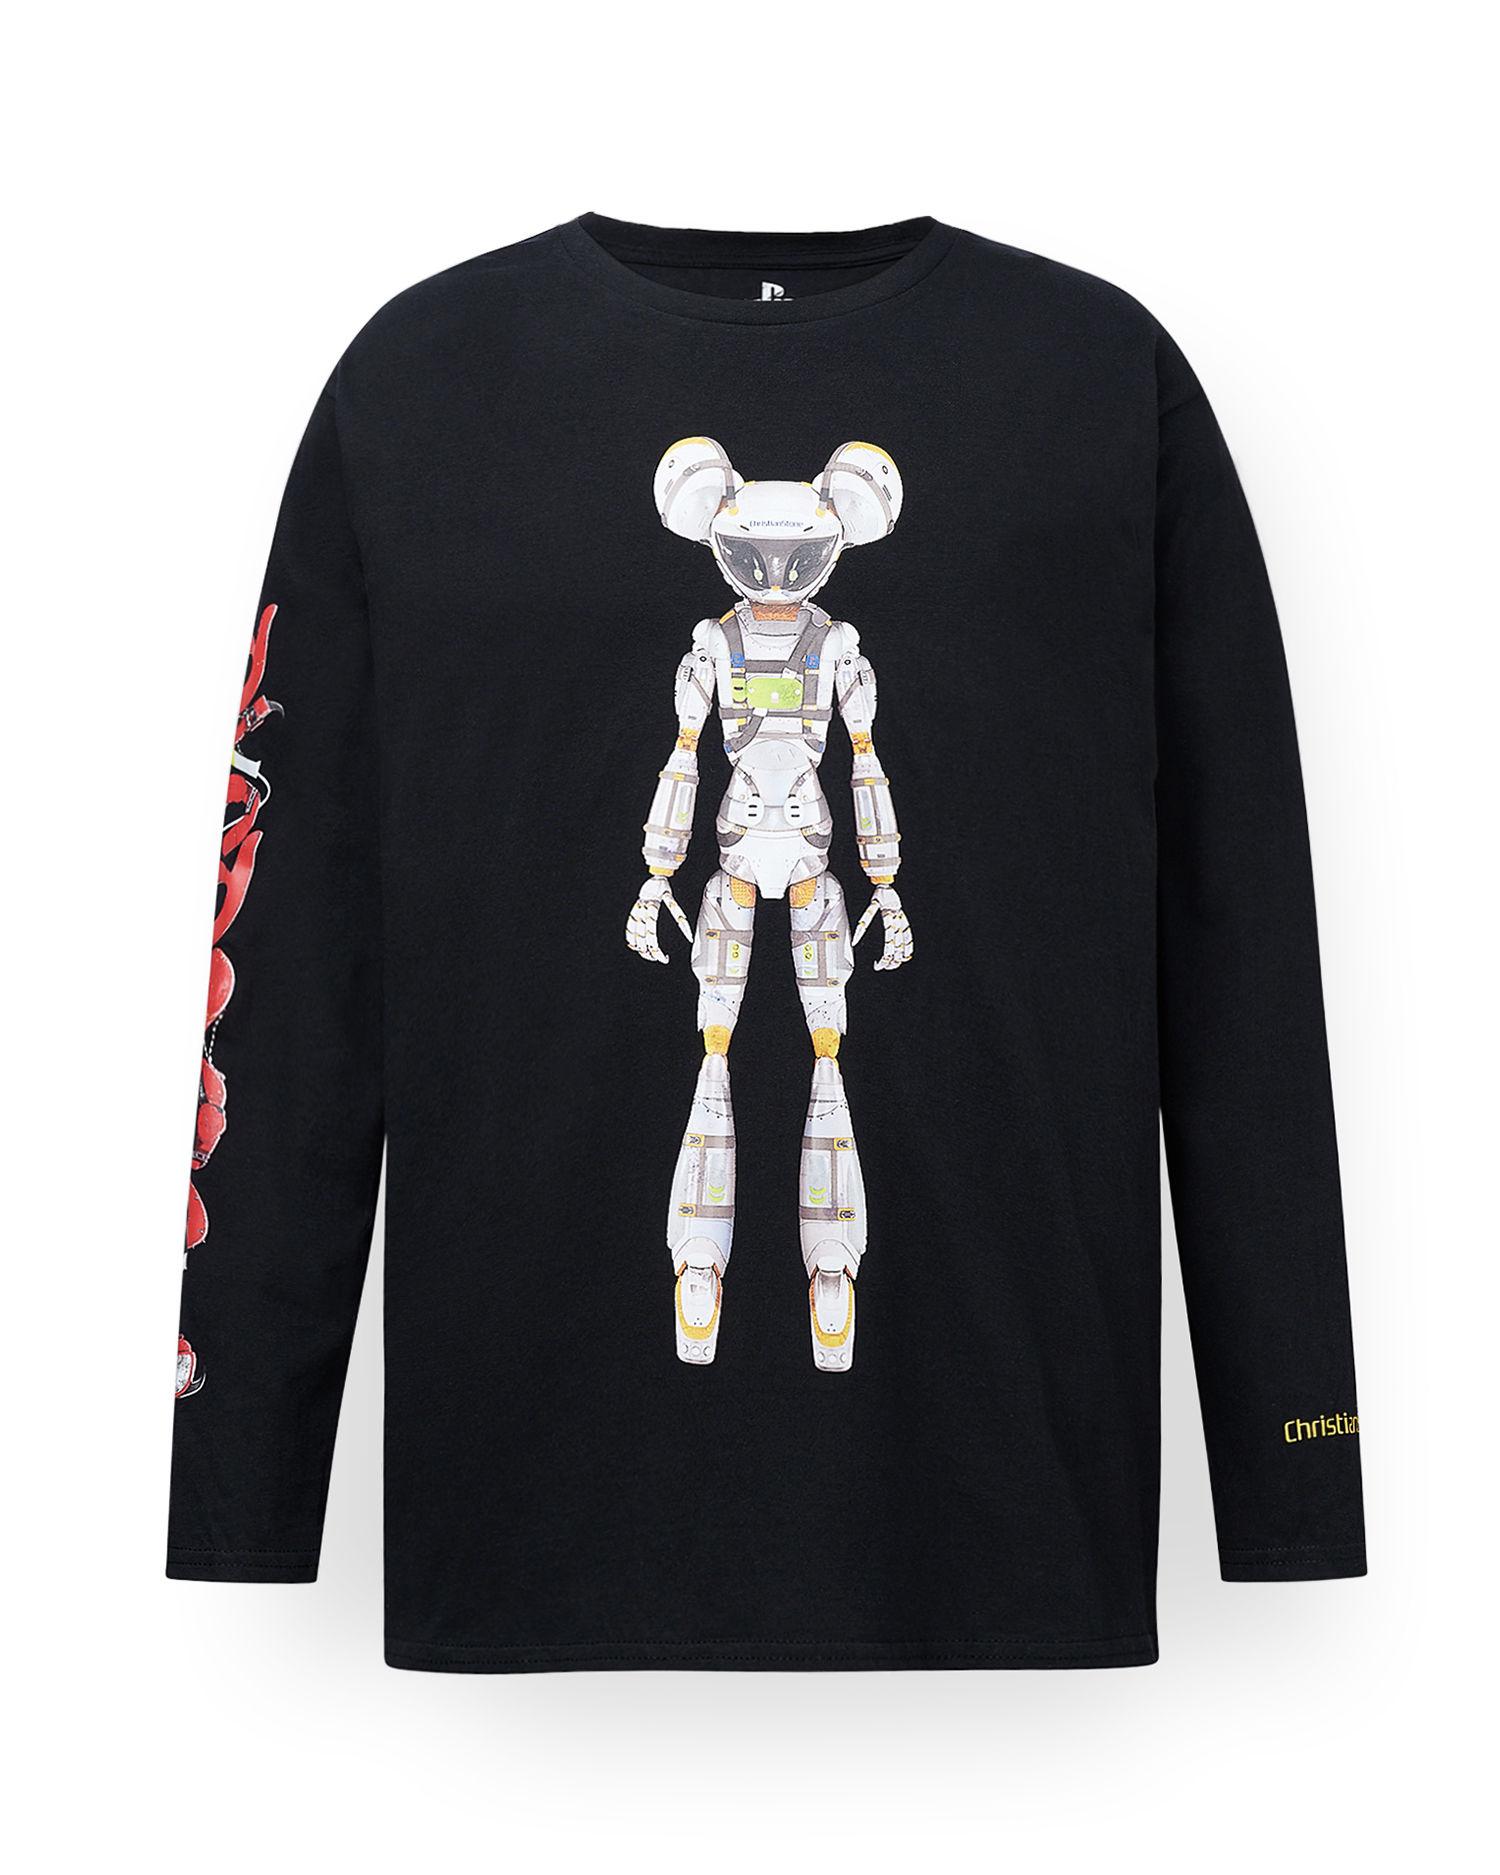 Mecha-mouse graphic tee by CHRISTIAN STONE